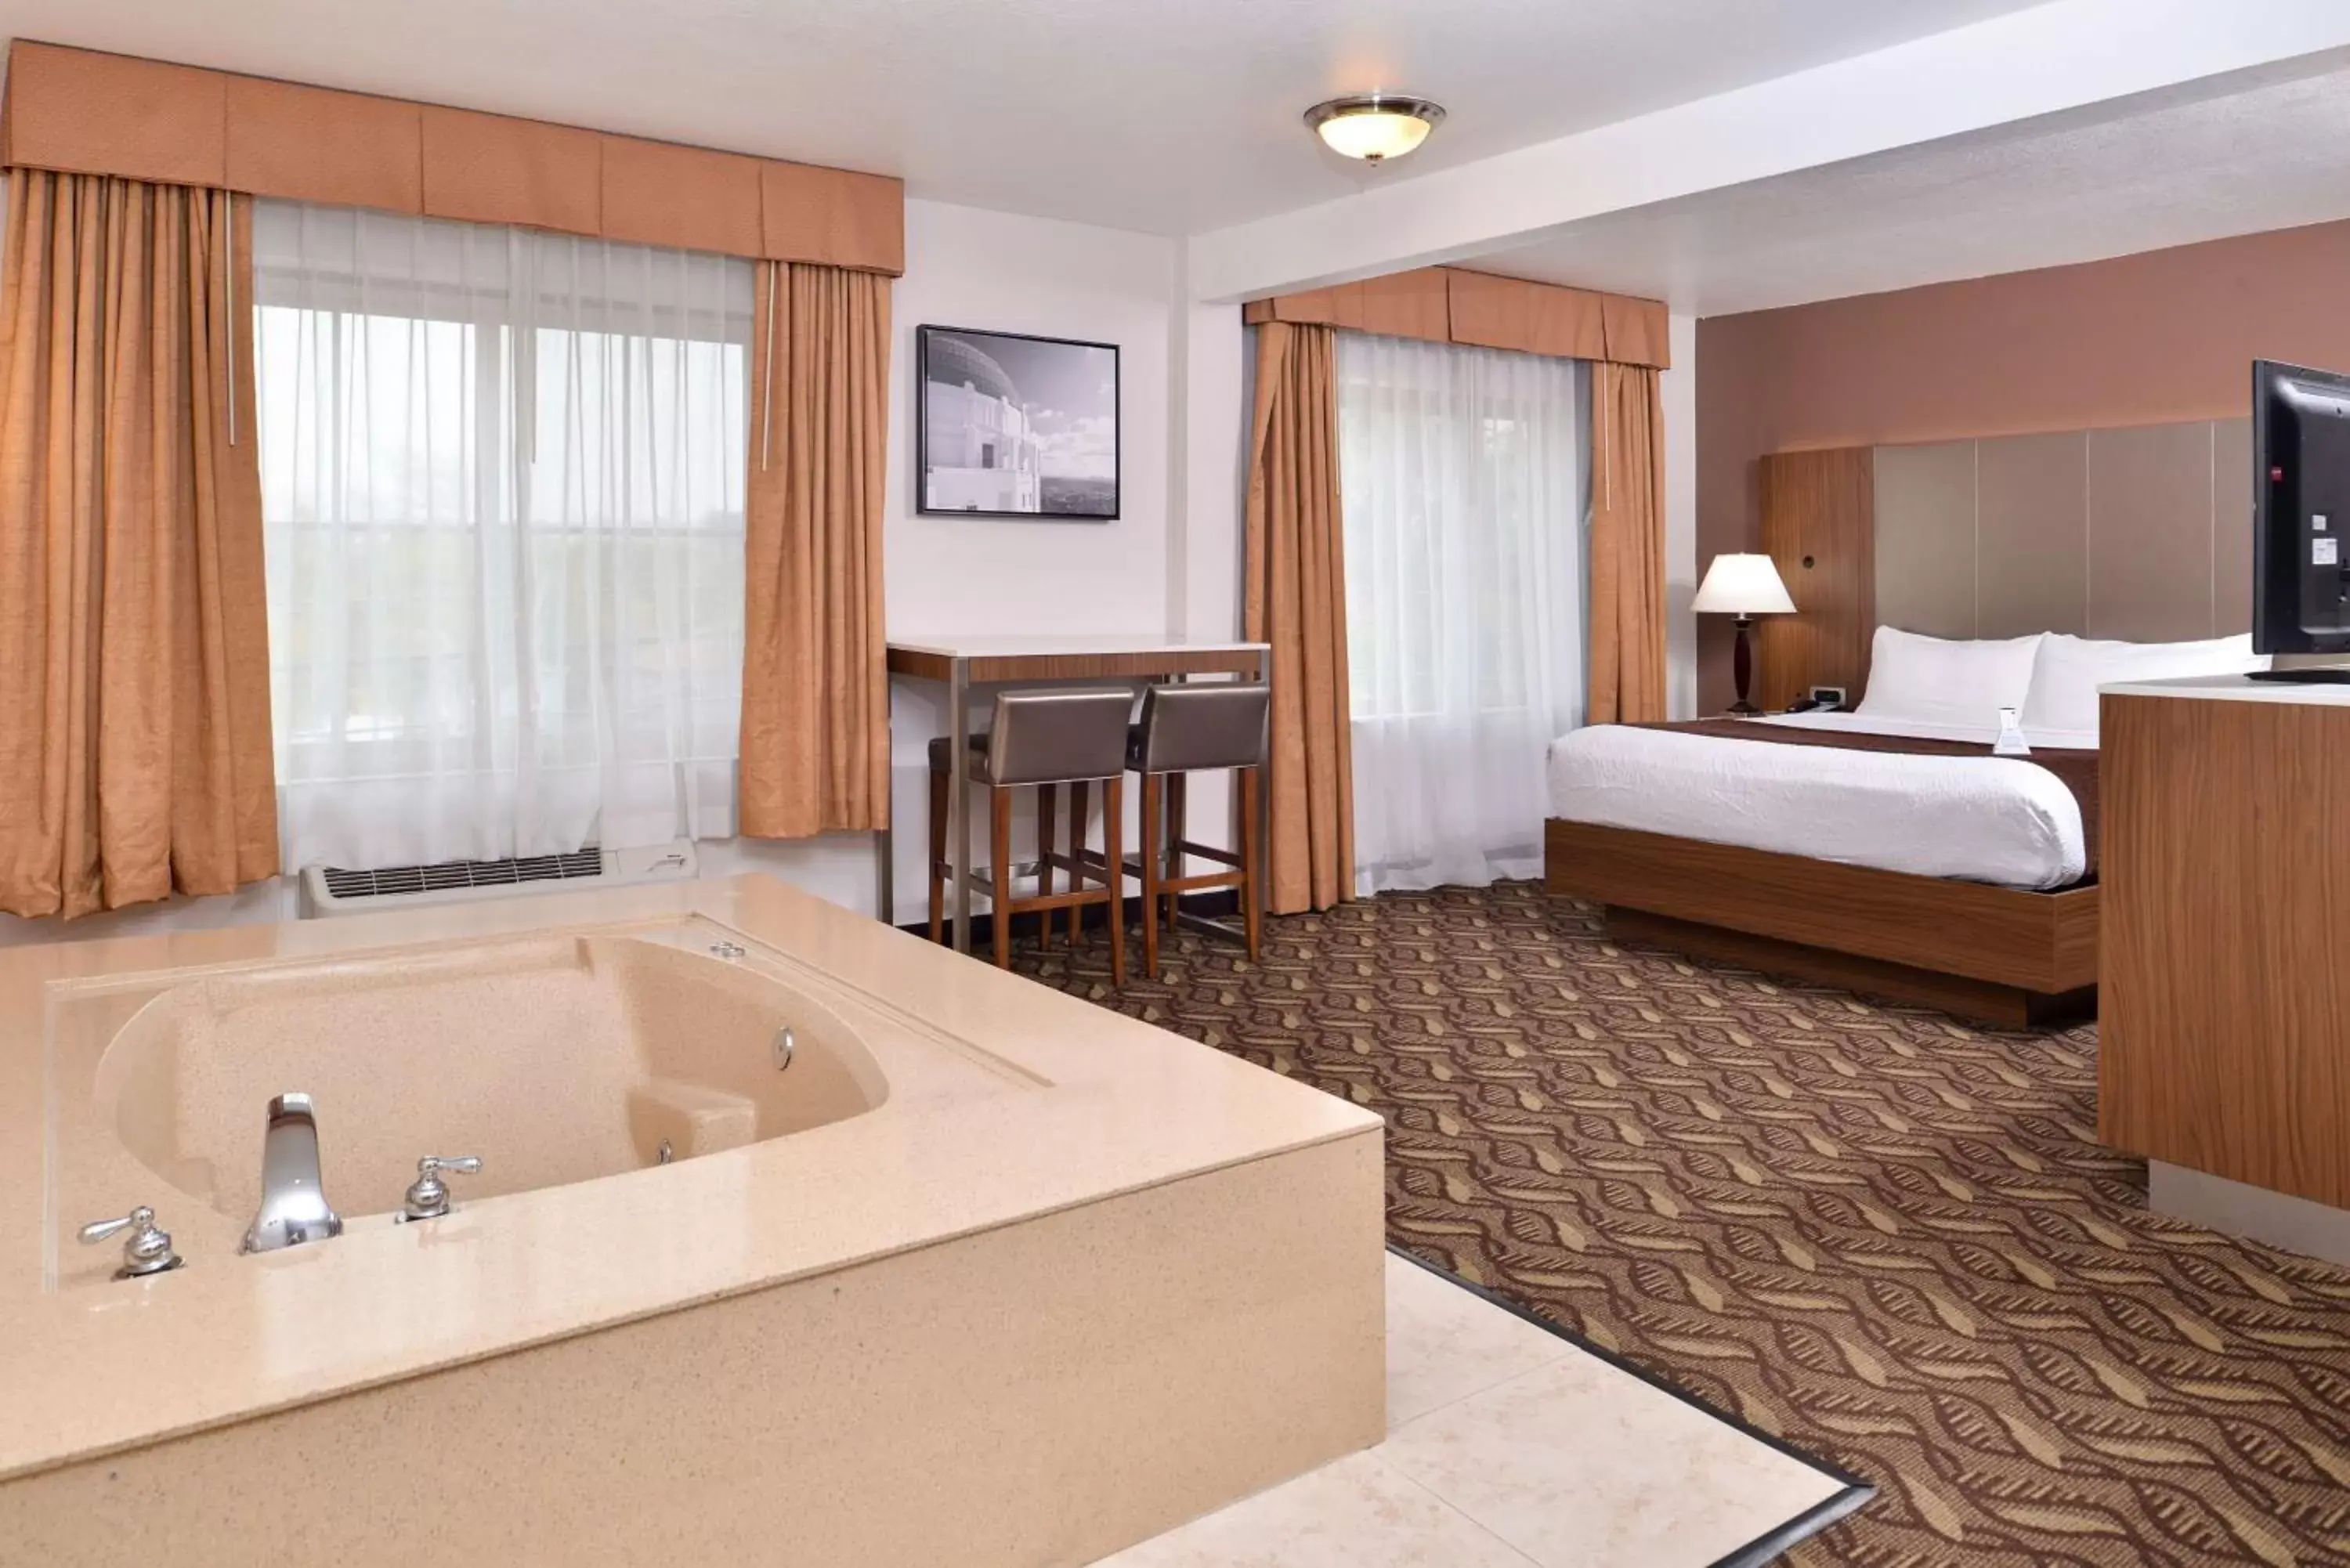 Photo of the whole room, Bathroom in Best Western Airport Plaza Inn Hotel - Los Angeles LAX